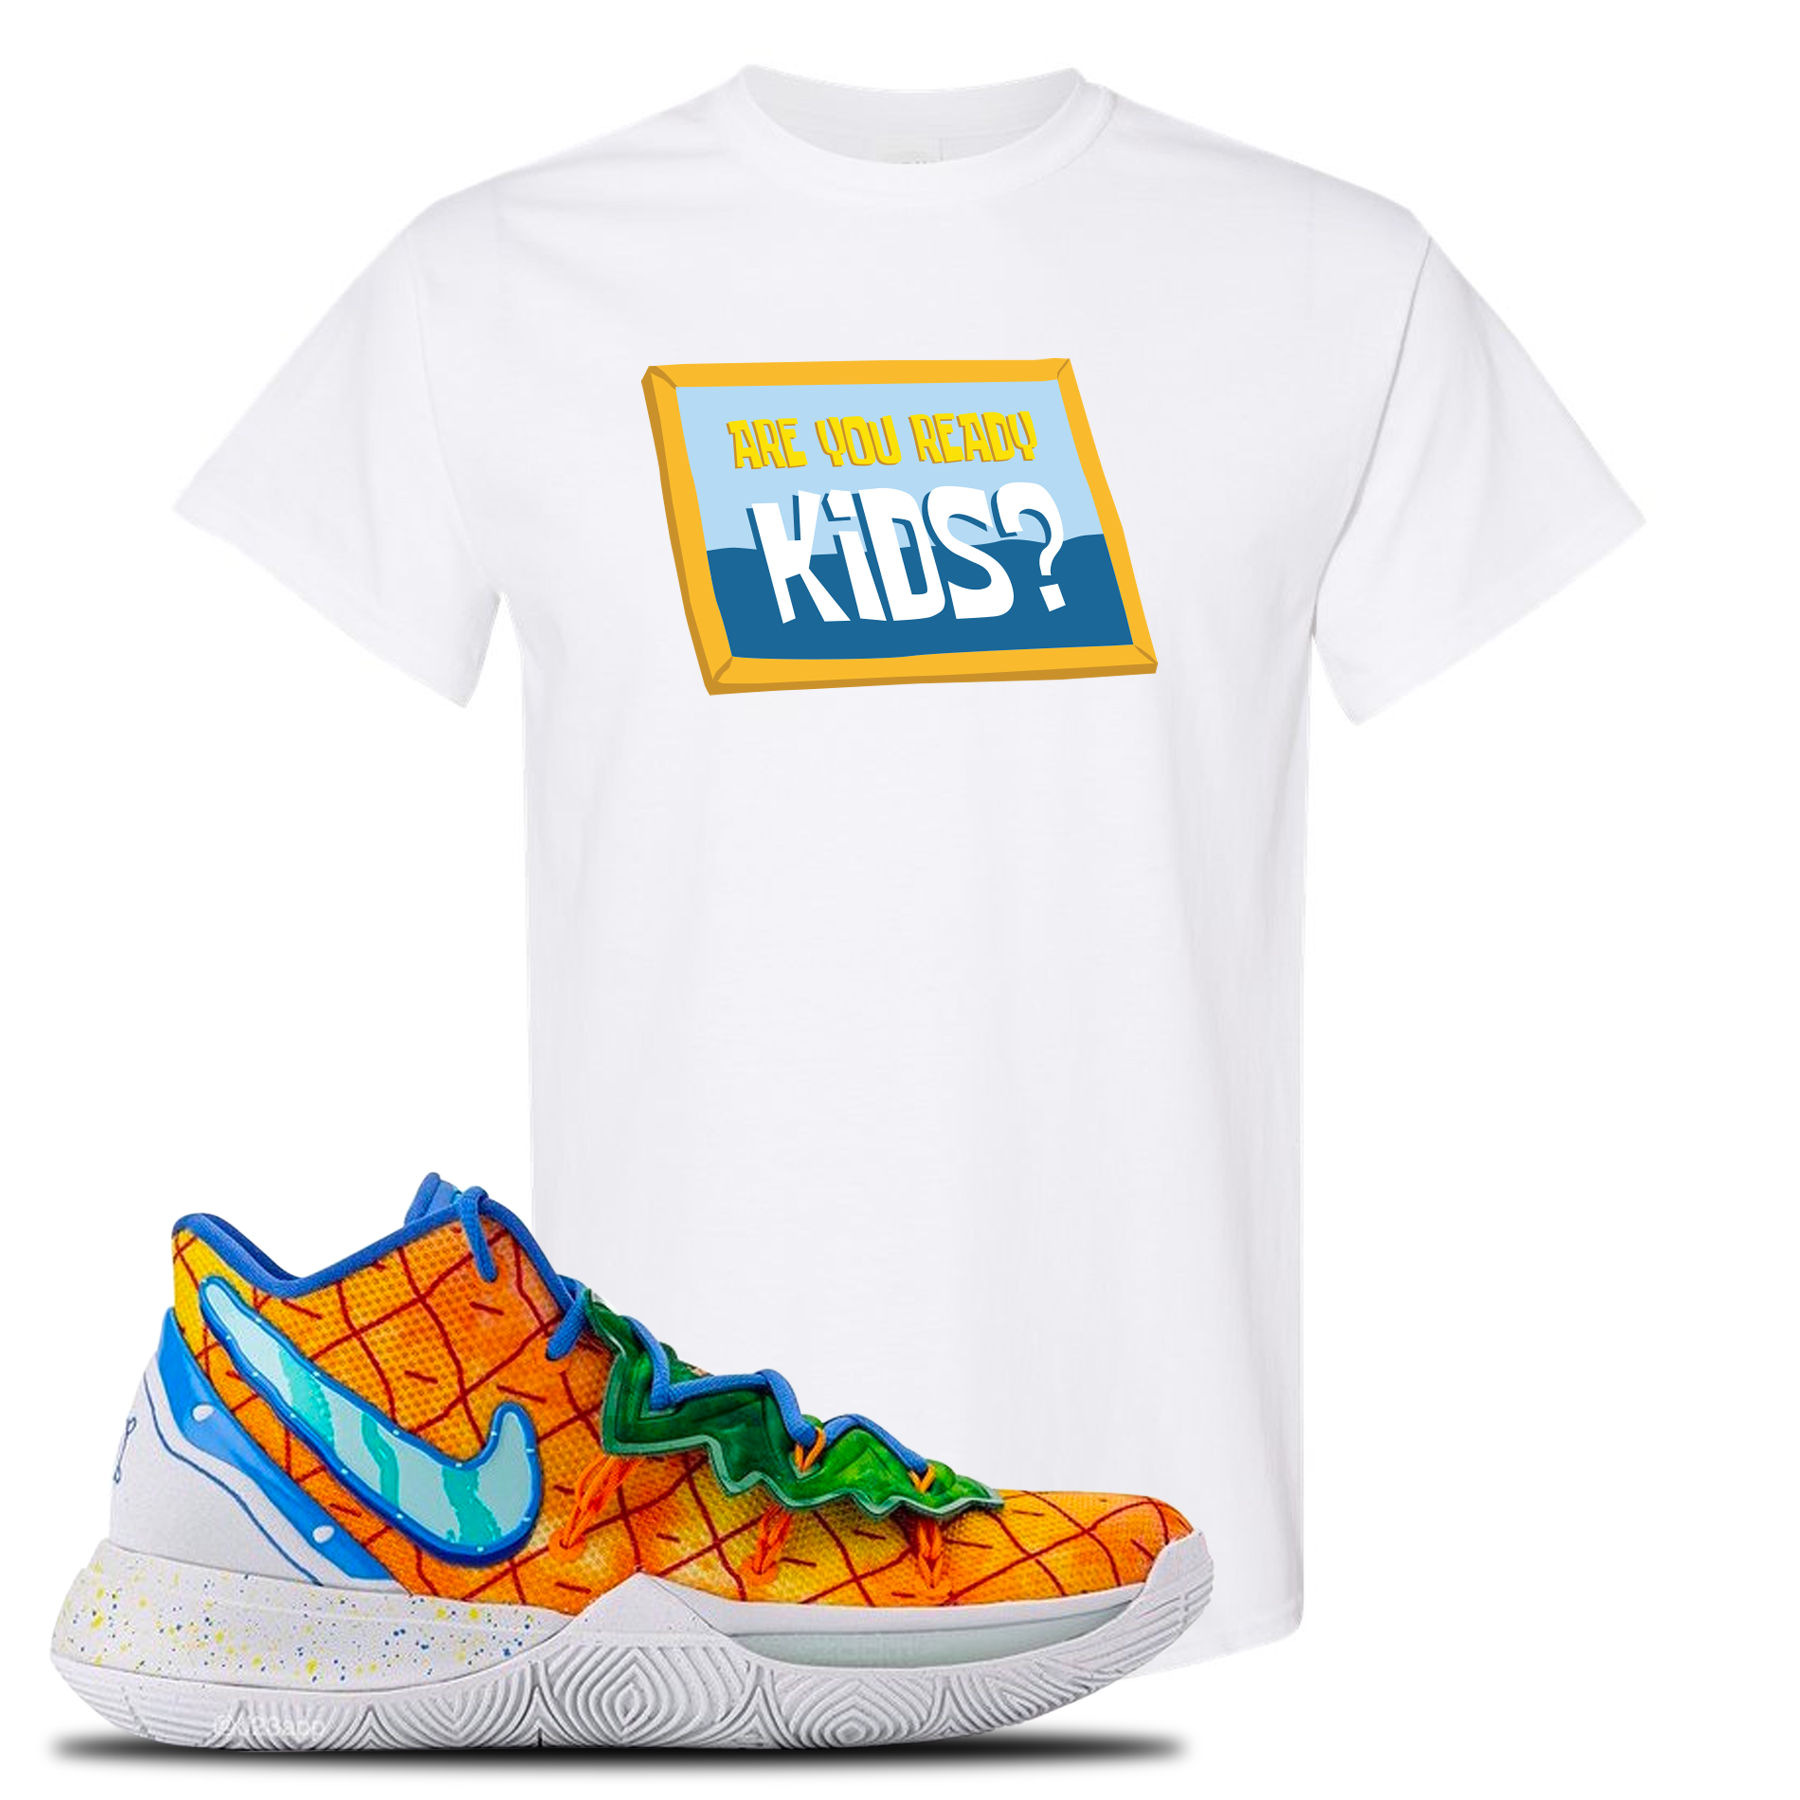 Kyrie 5 Pineapple House Are You Ready Kids? White Sneaker Hook Up T-Shirt